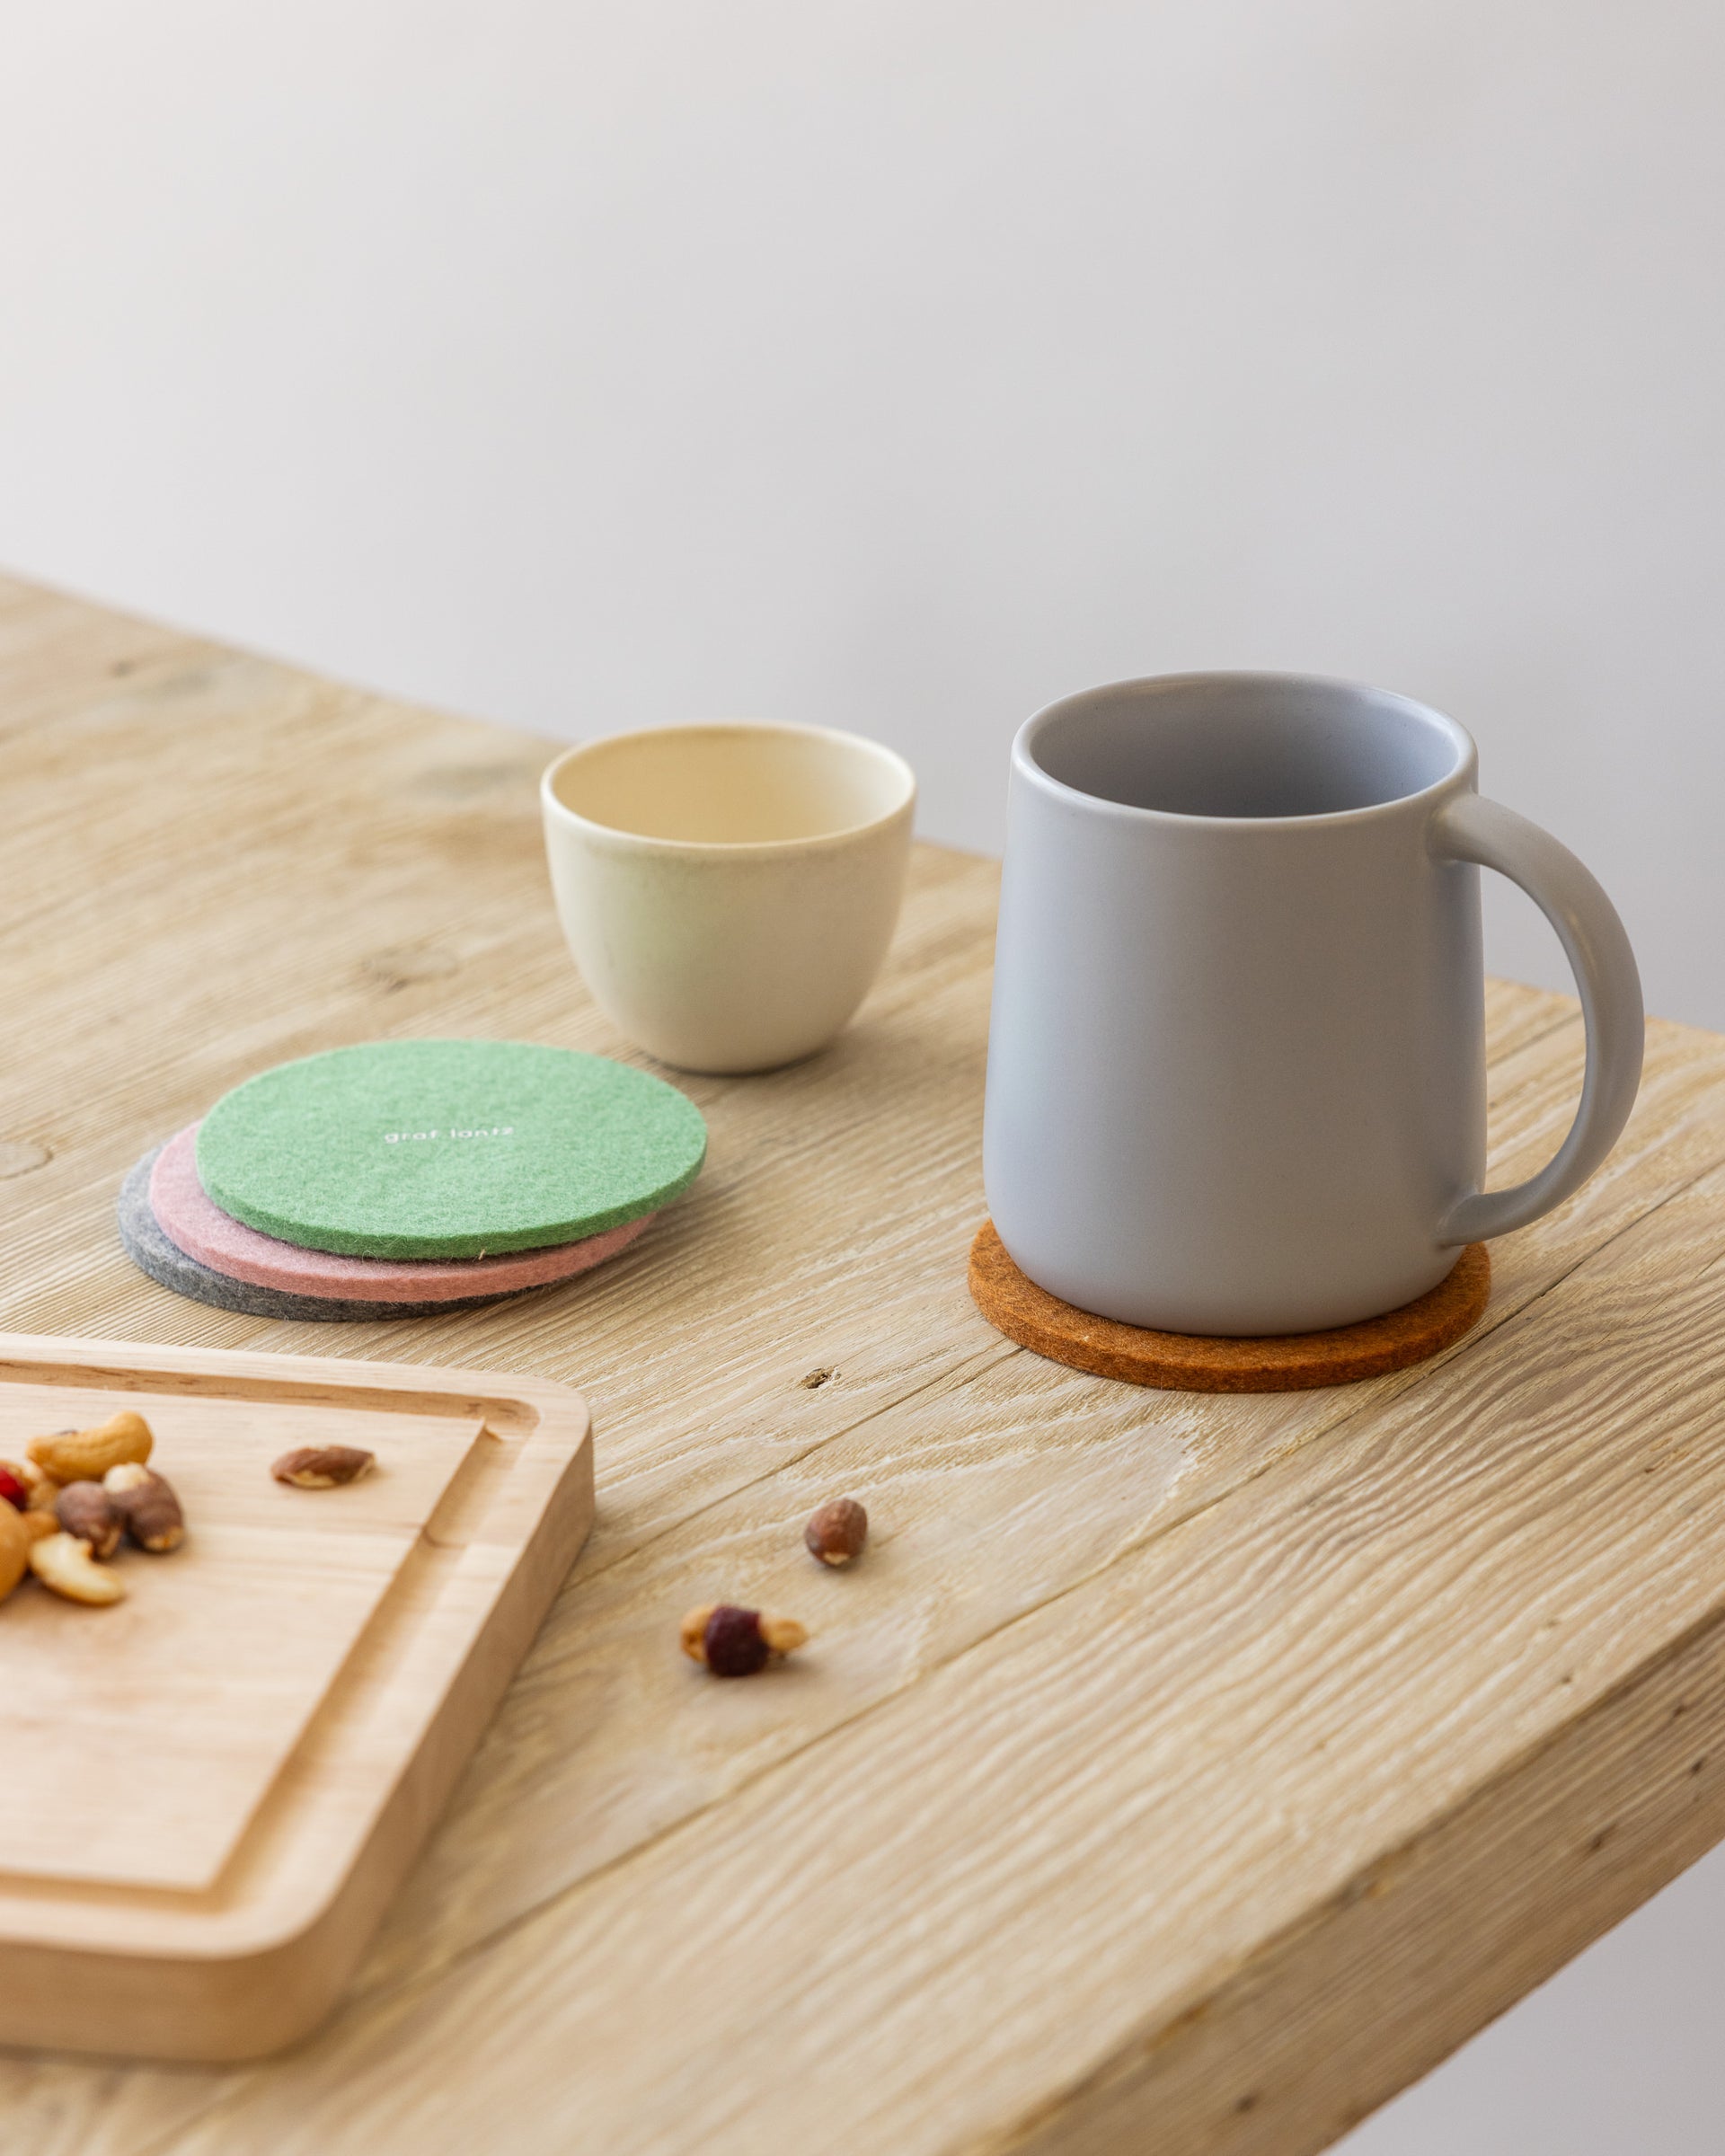 Stack of three round coasters, a white mug standing on a rust-colored coaster on a wooden tabletop